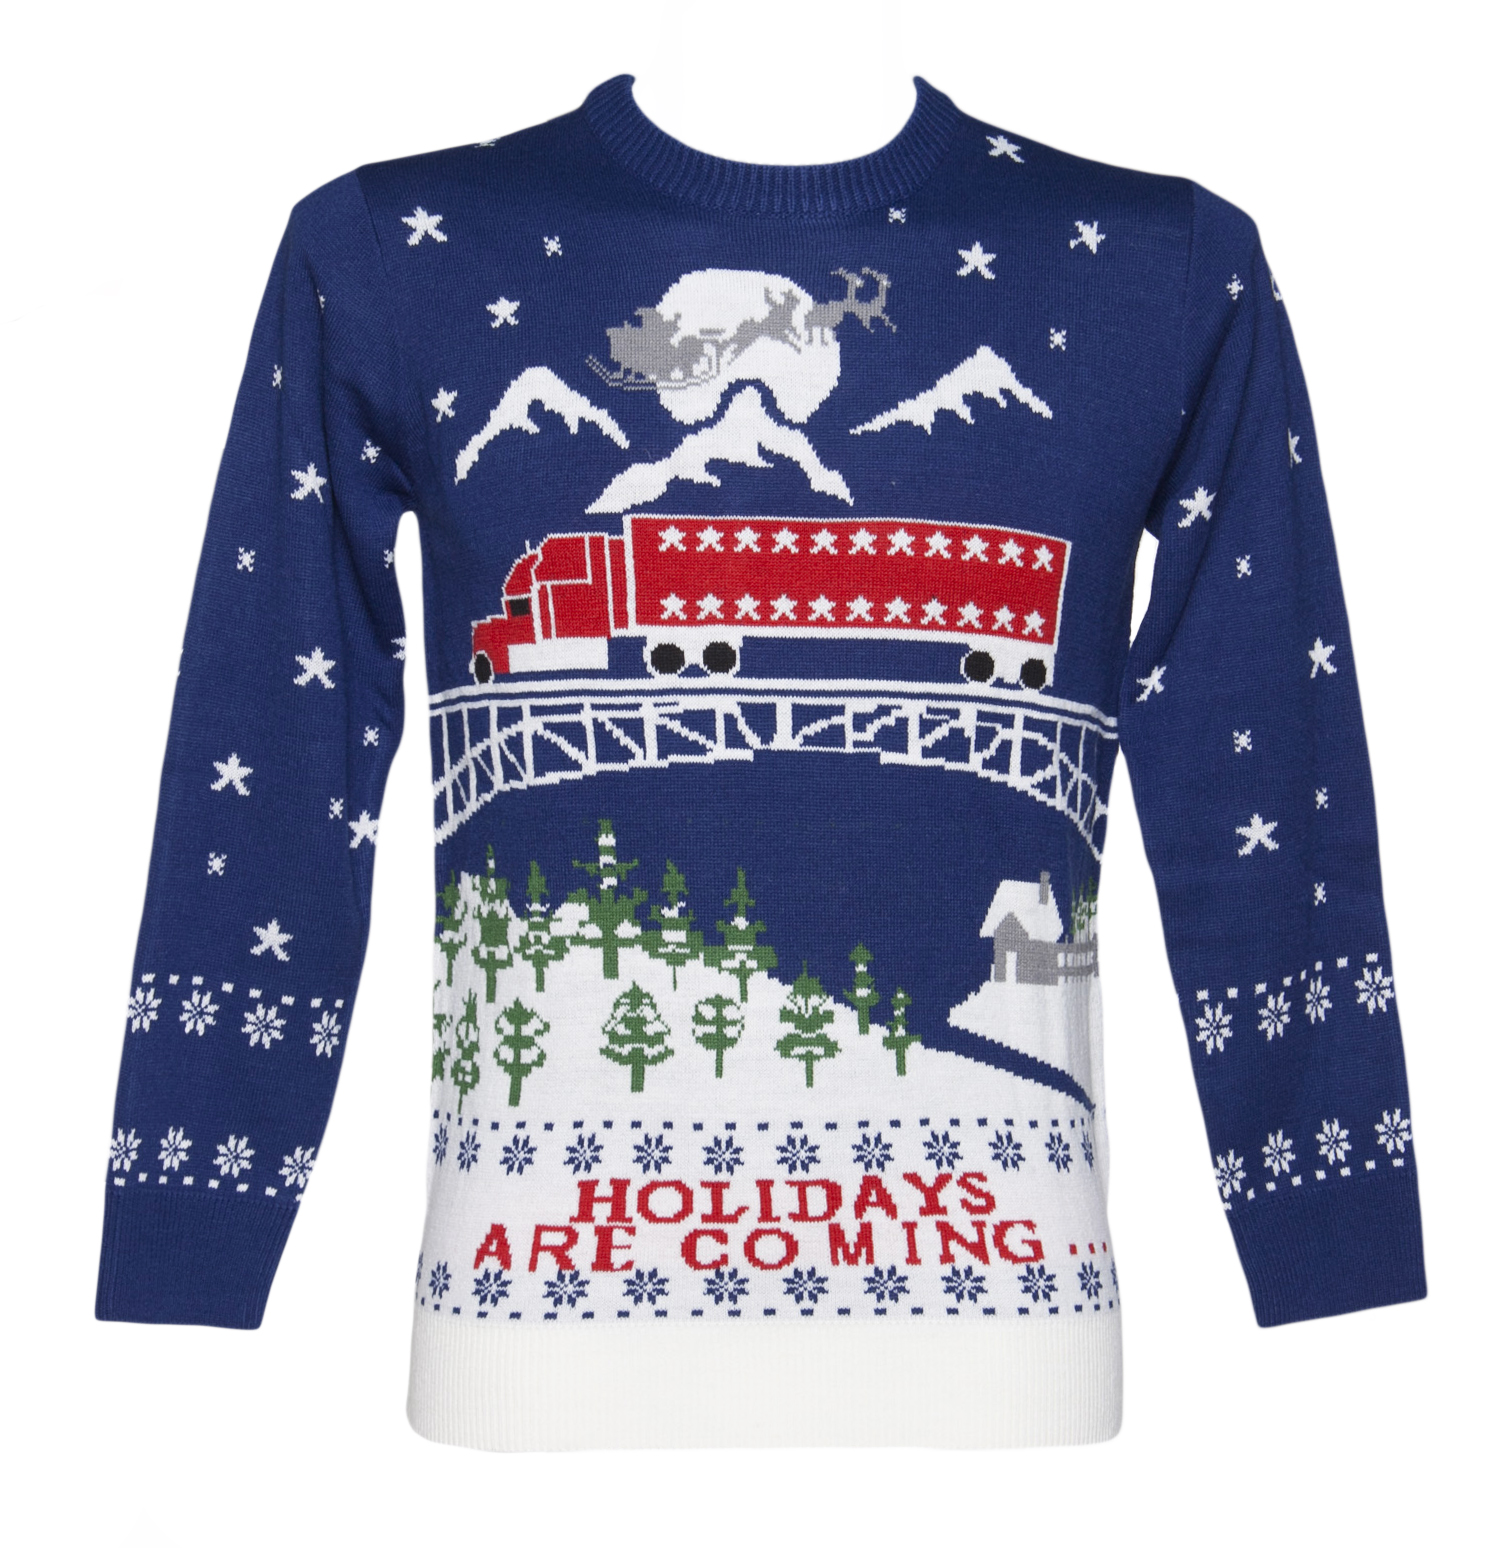 Unisex Holidays Are Coming Christmas Jumper from